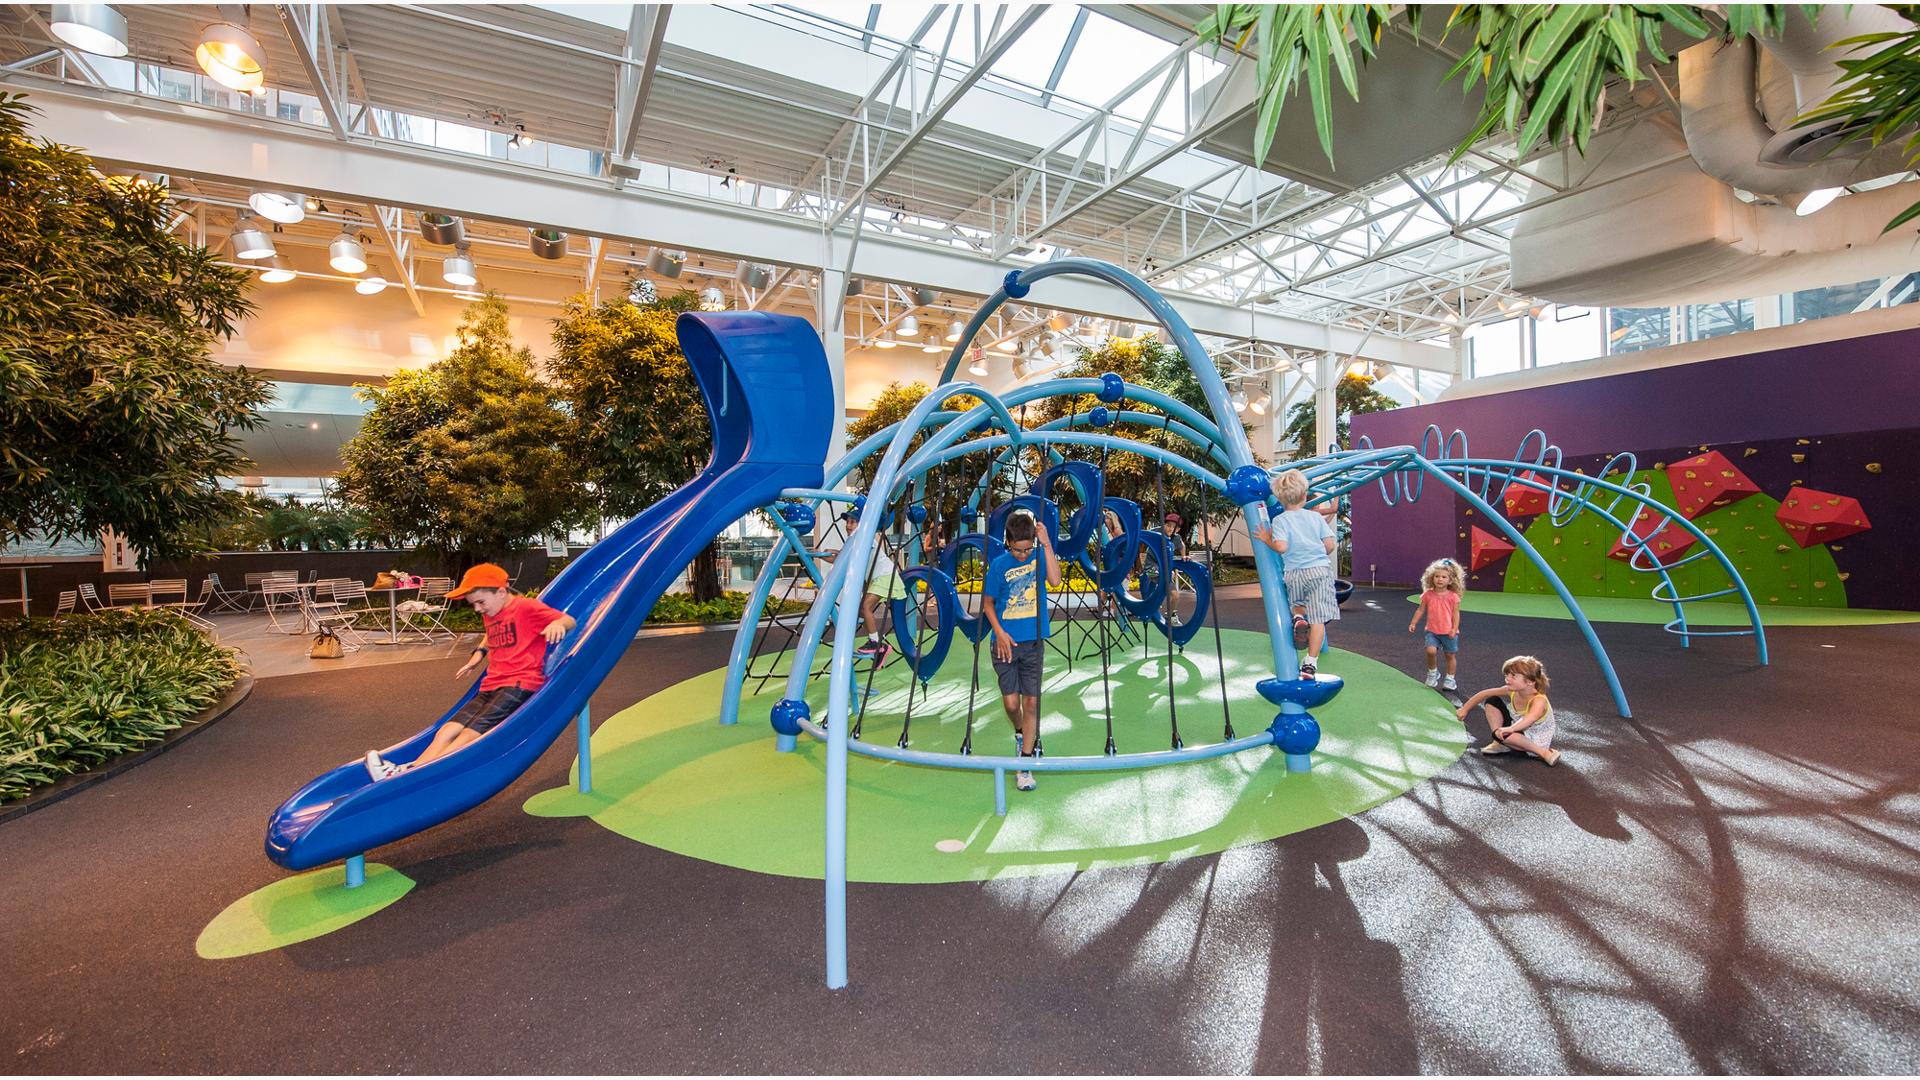 Indoor playground with rubber surfacing  and kid going down blue slide. Smaller kids playing on the floor while 2 kids play in net structure. Trees and greenery in background  with small place to eat. 